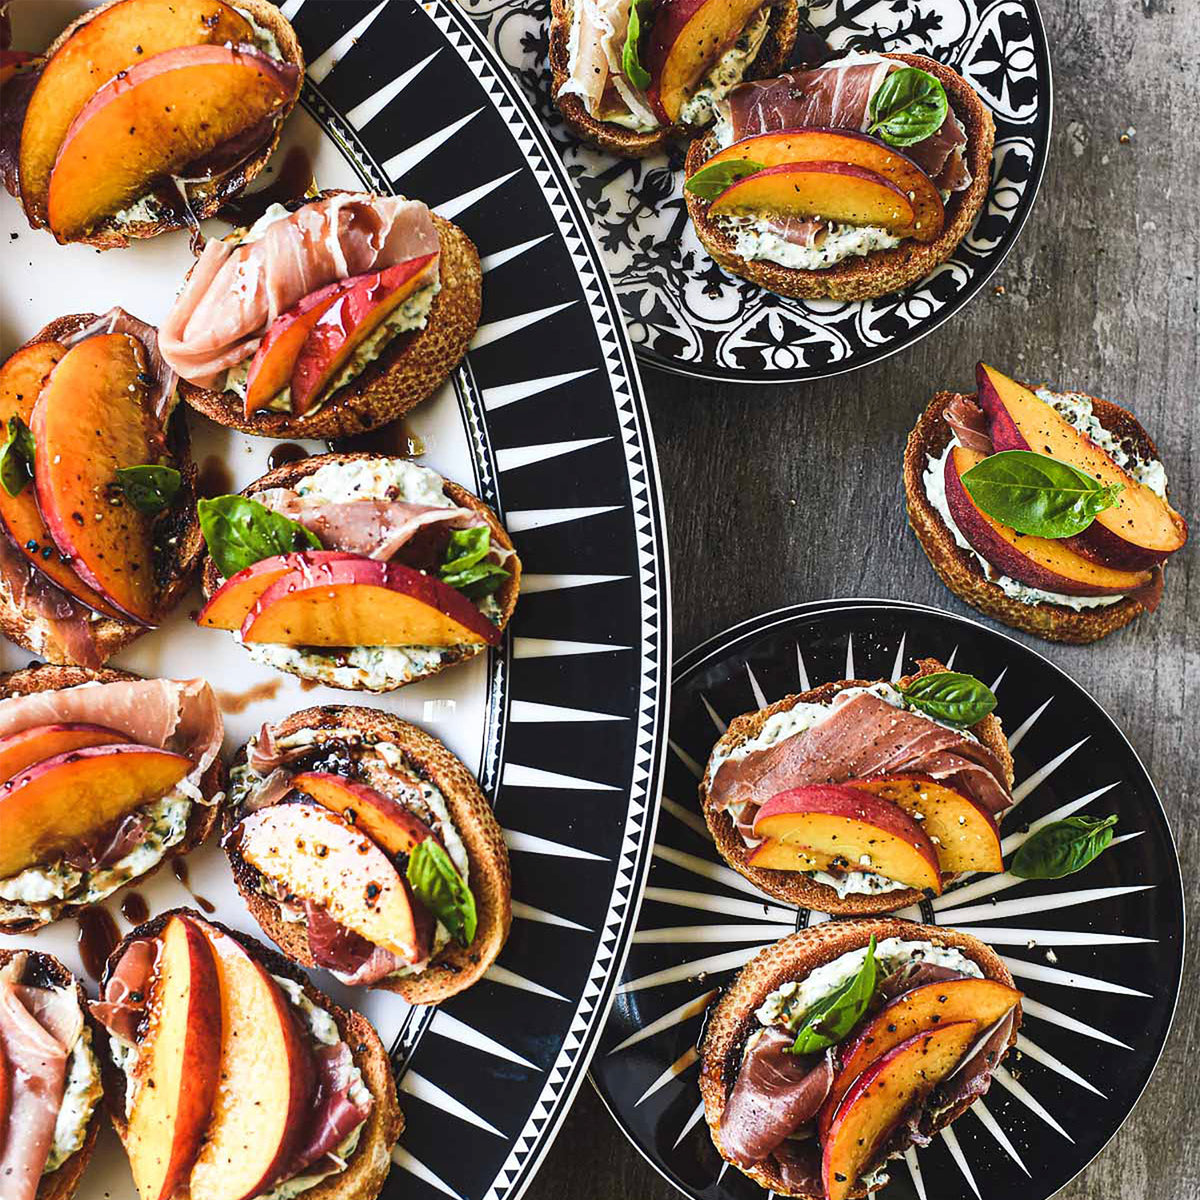 A variety of appetizers featuring sliced peaches, prosciutto, ricotta, and basil on toasted bread are elegantly presented on the Marrakech Oval Rimmed Platter from Caskata Artisanal Home.